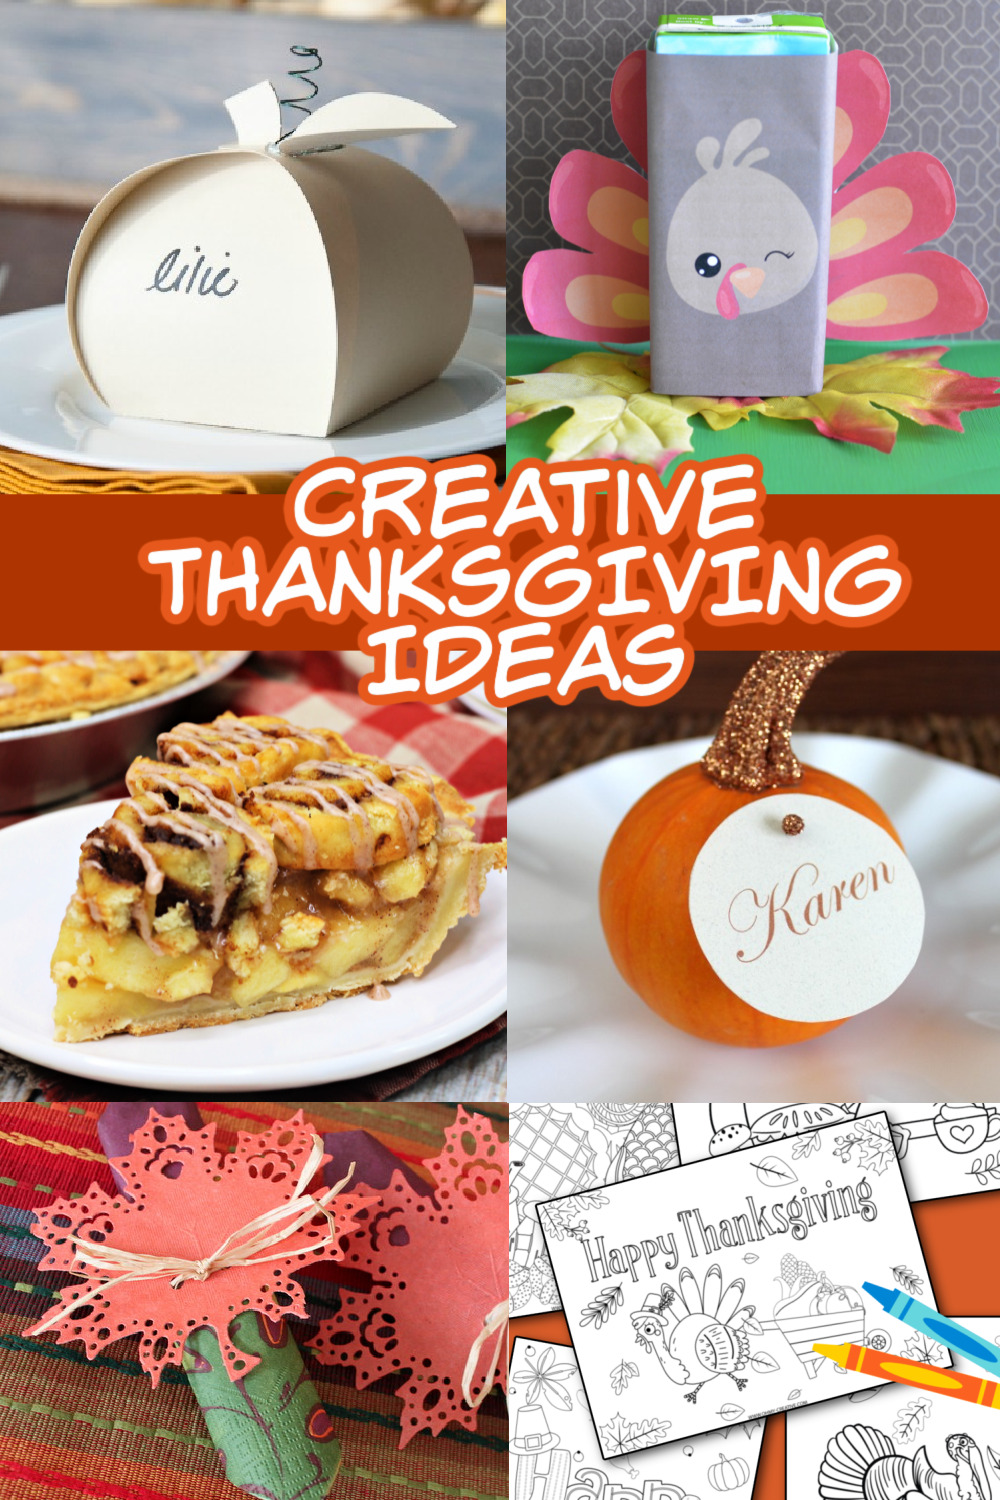 Creative Thanksgiving Ideas That Are Beyond The Ordinary